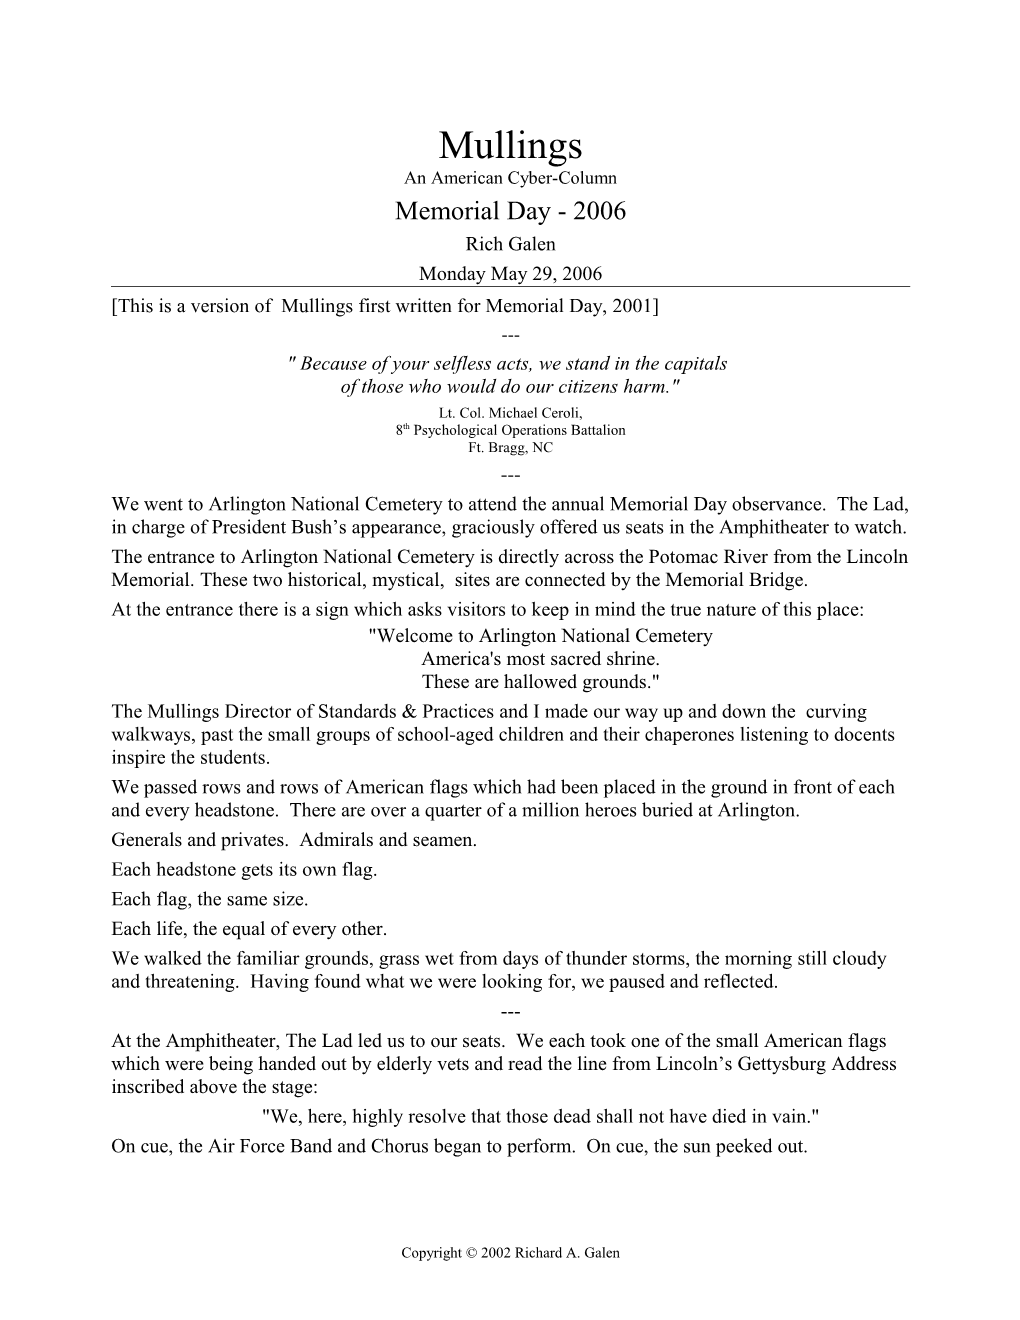 This Is a Version of Mullings First Written for Memorial Day, 2001